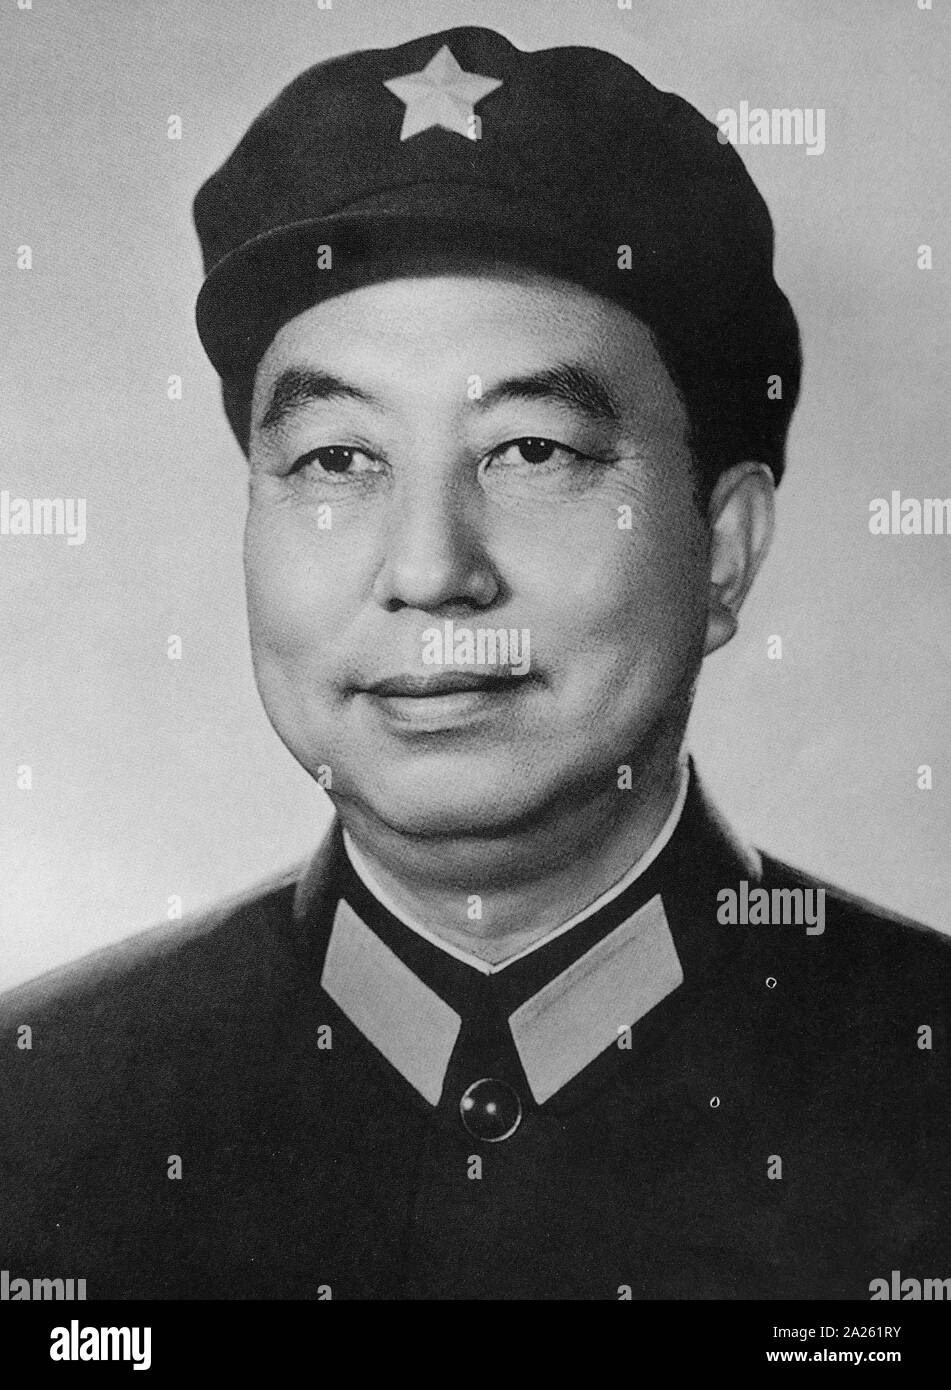 Hua Guofeng, 1976. Hua Guofeng (1921 - 2008), was a Chinese politician and Chairman of the Communist Party of China and Premier of the People's Republic of China. Hua held the top offices of the government, party, and the military after Premier Zhou and Chairman Mao's death Stock Photo